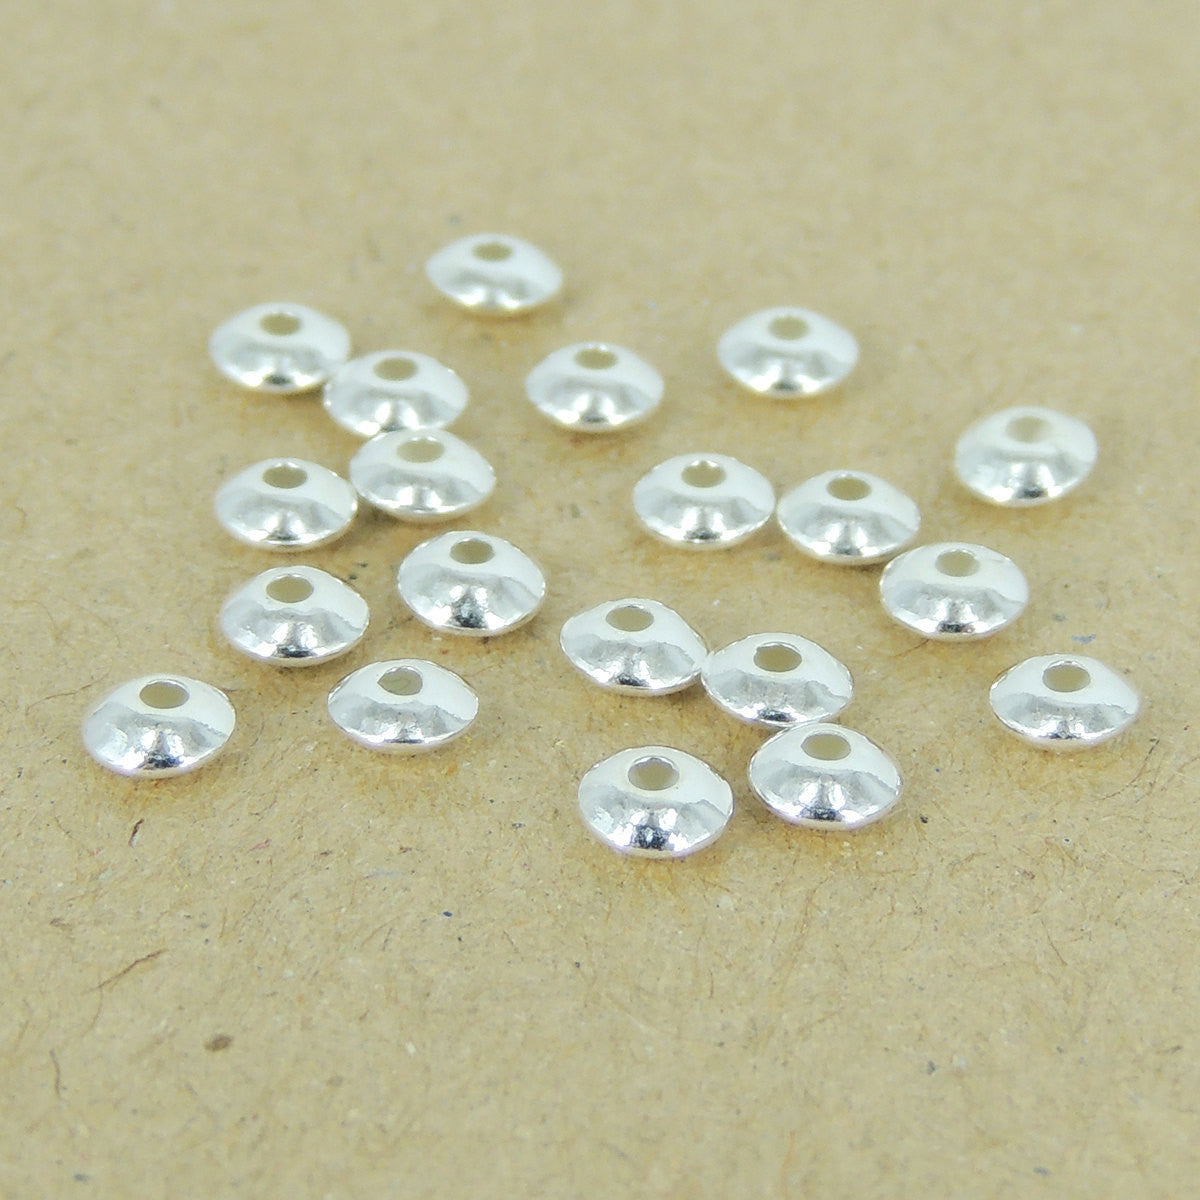 20 PCS Minimal Rondelle Spacer Beads - S925 Sterling Silver WSP354X20